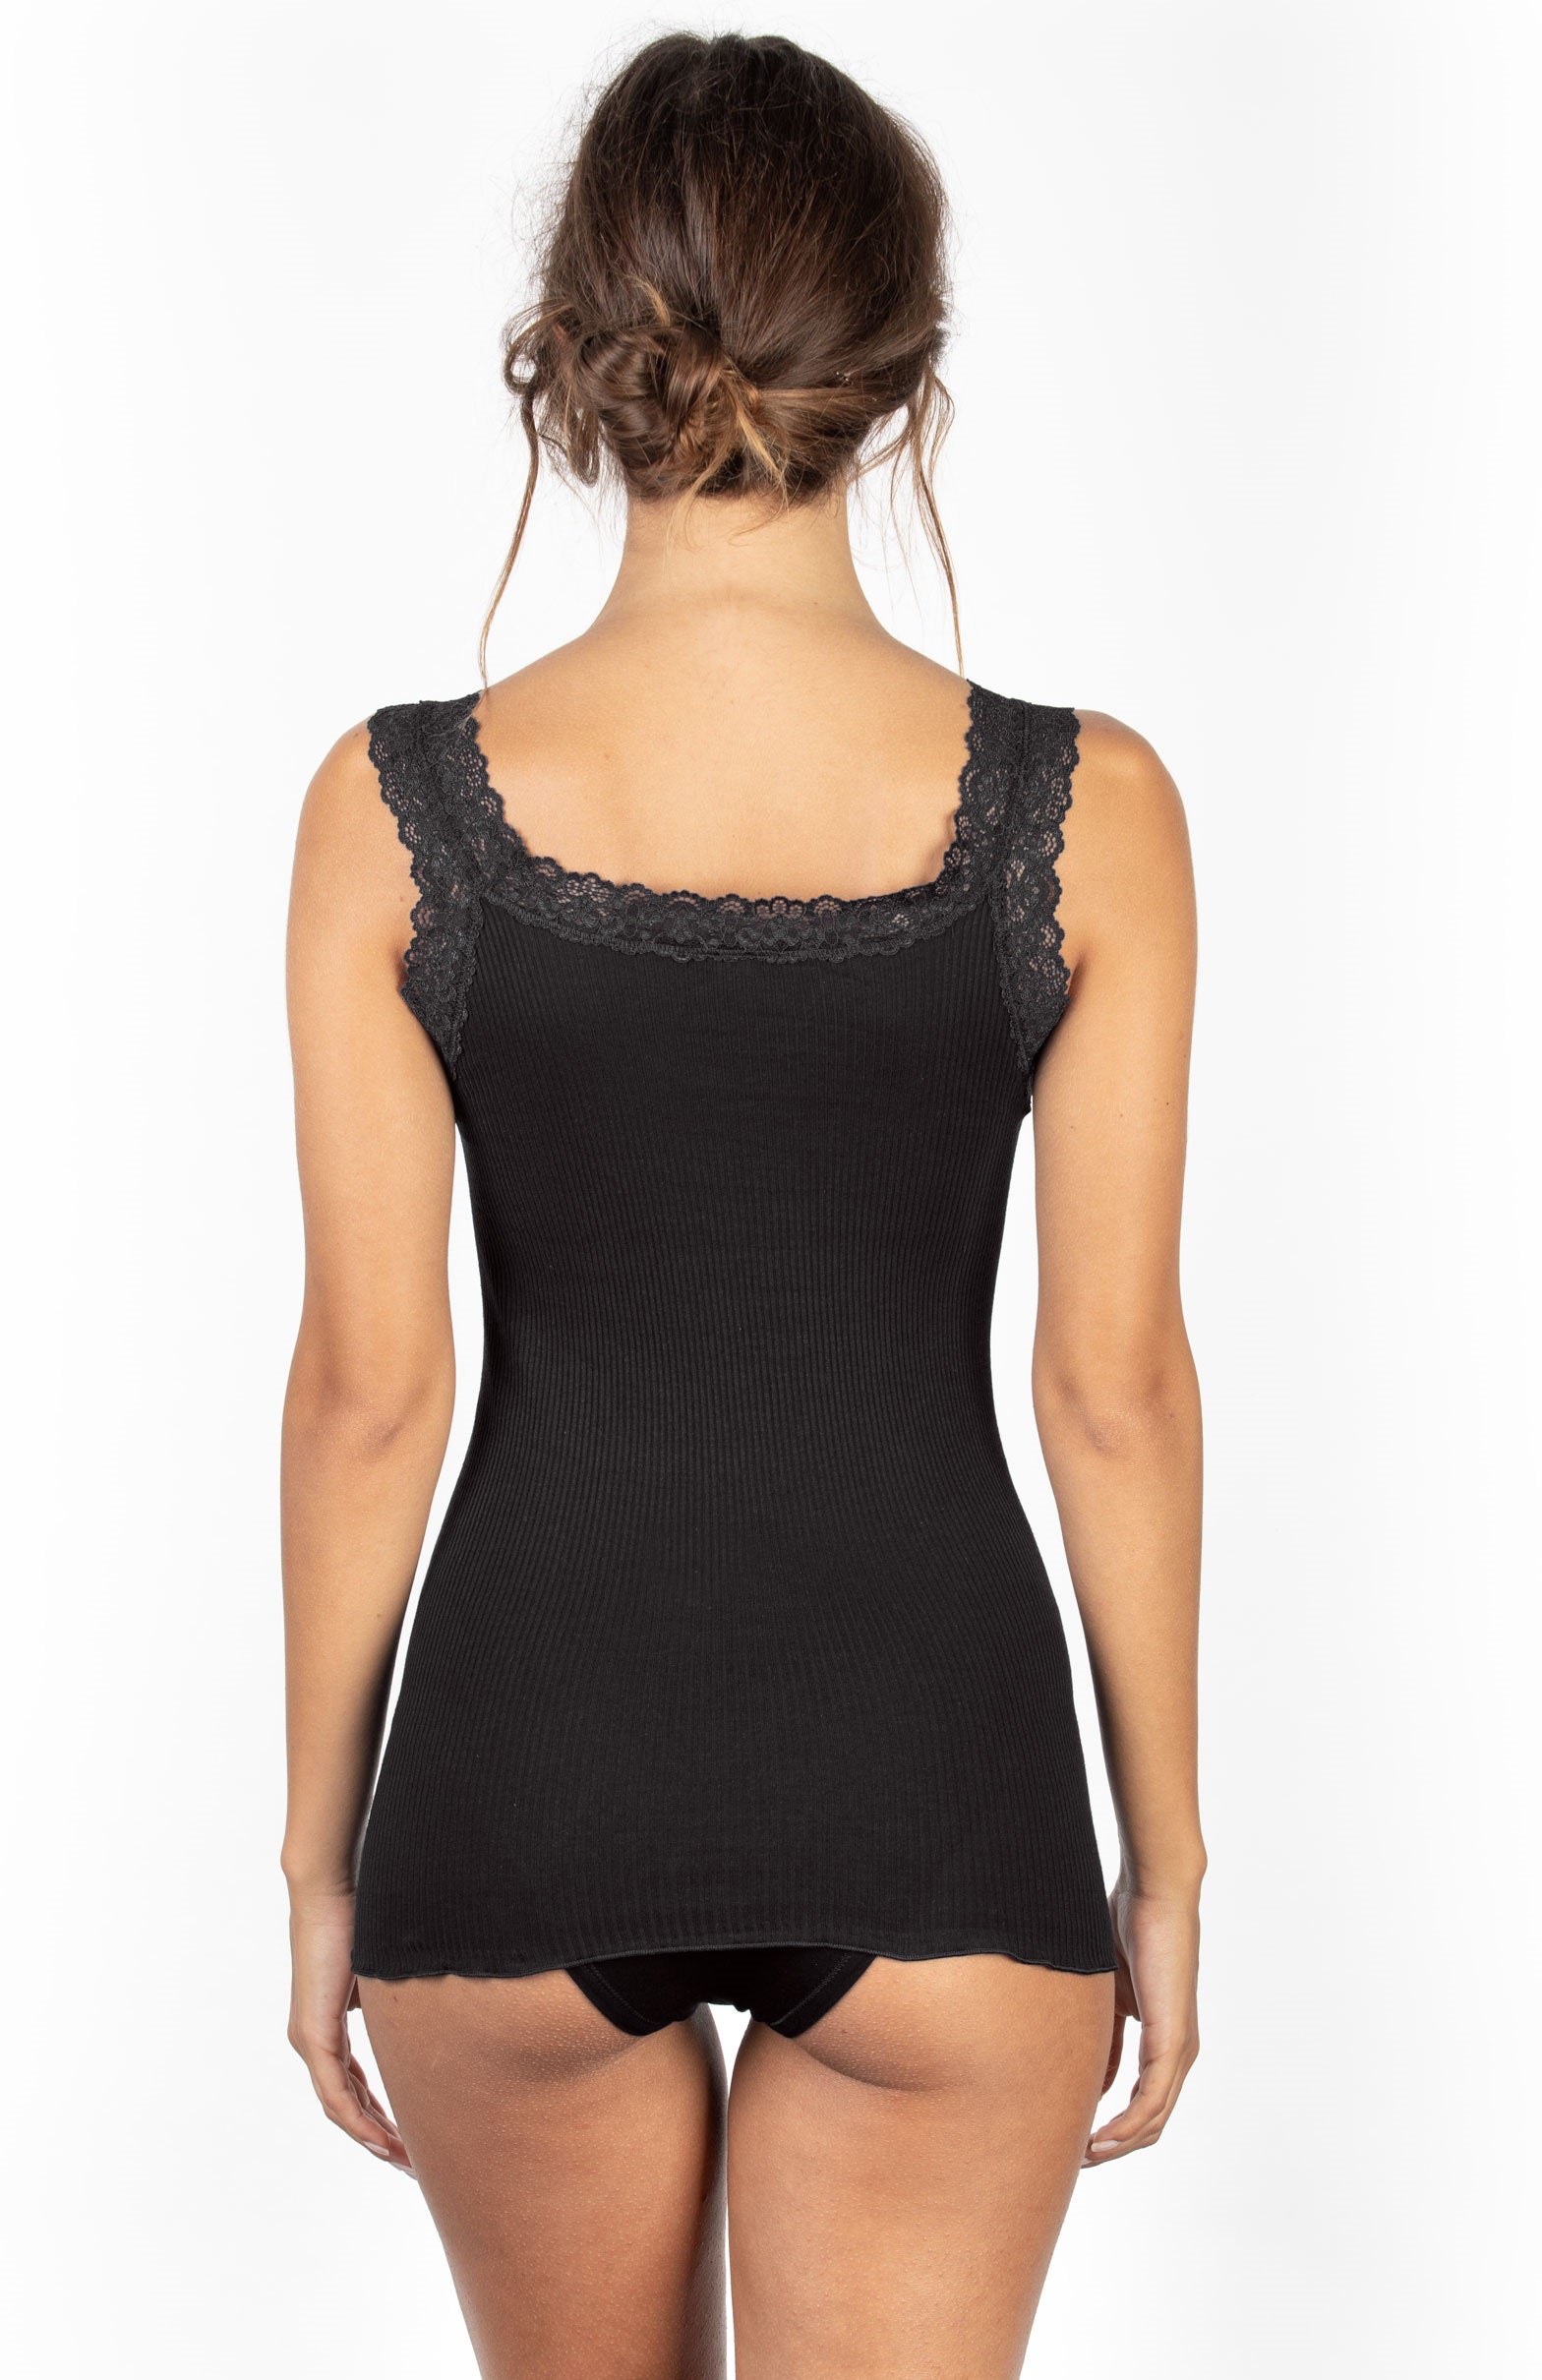 This Italian-crafted Ribbed Cotton Lace Straps Camisole is created with a lightweight cotton fabric woven with a tubular knit, providing smooth, uninterrupted sides. 